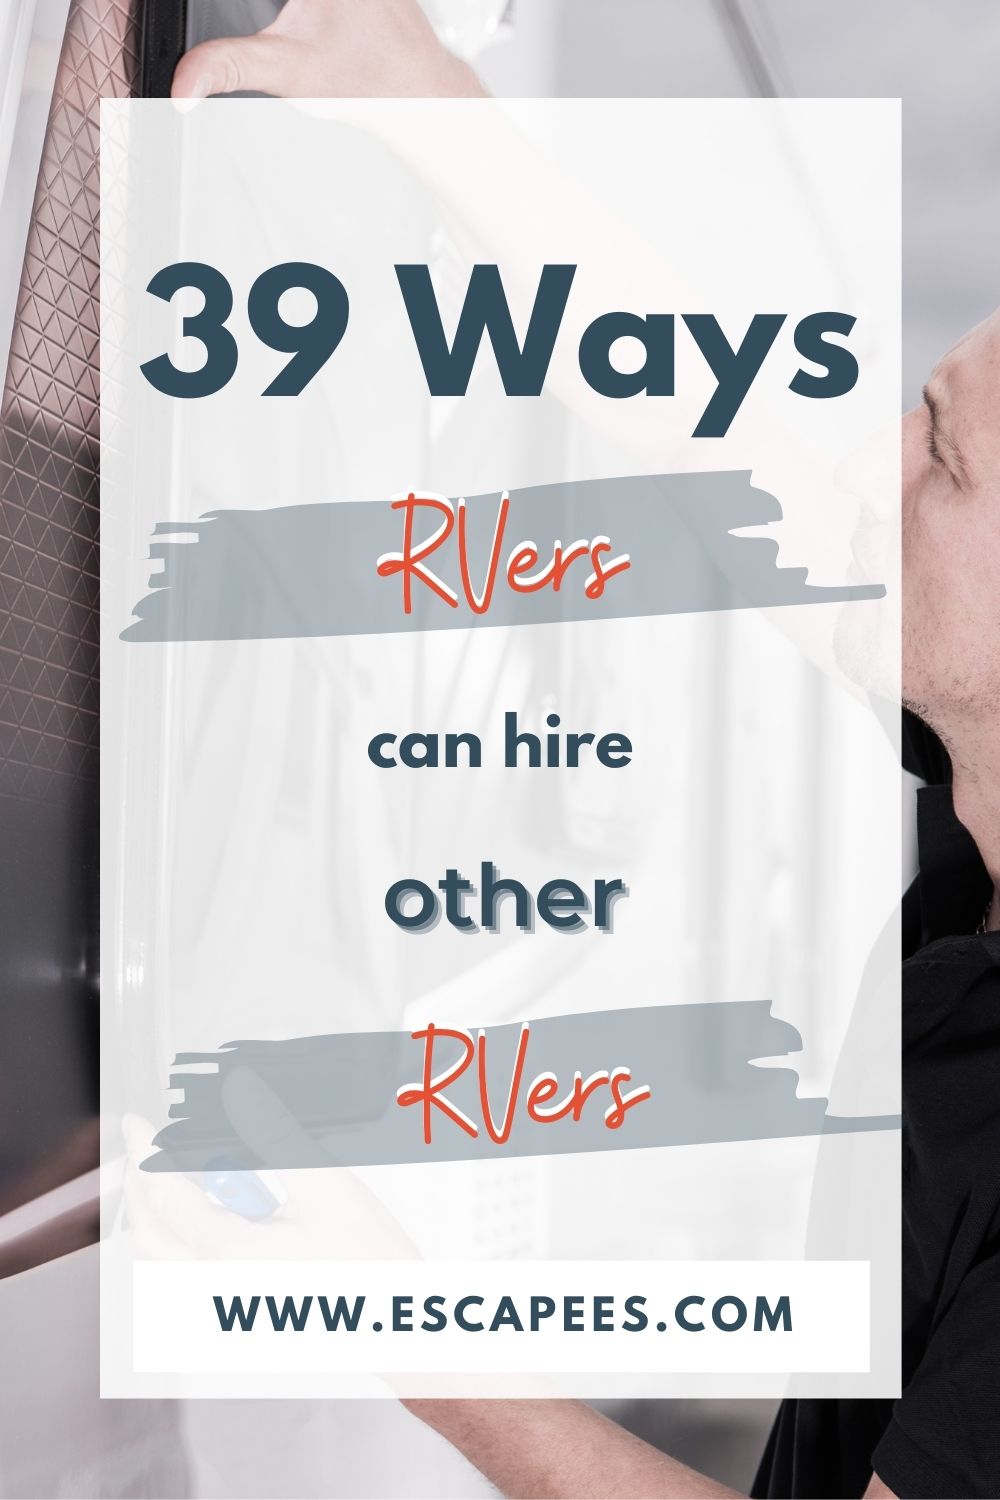 RVers Hire Other RVers Pinterest image